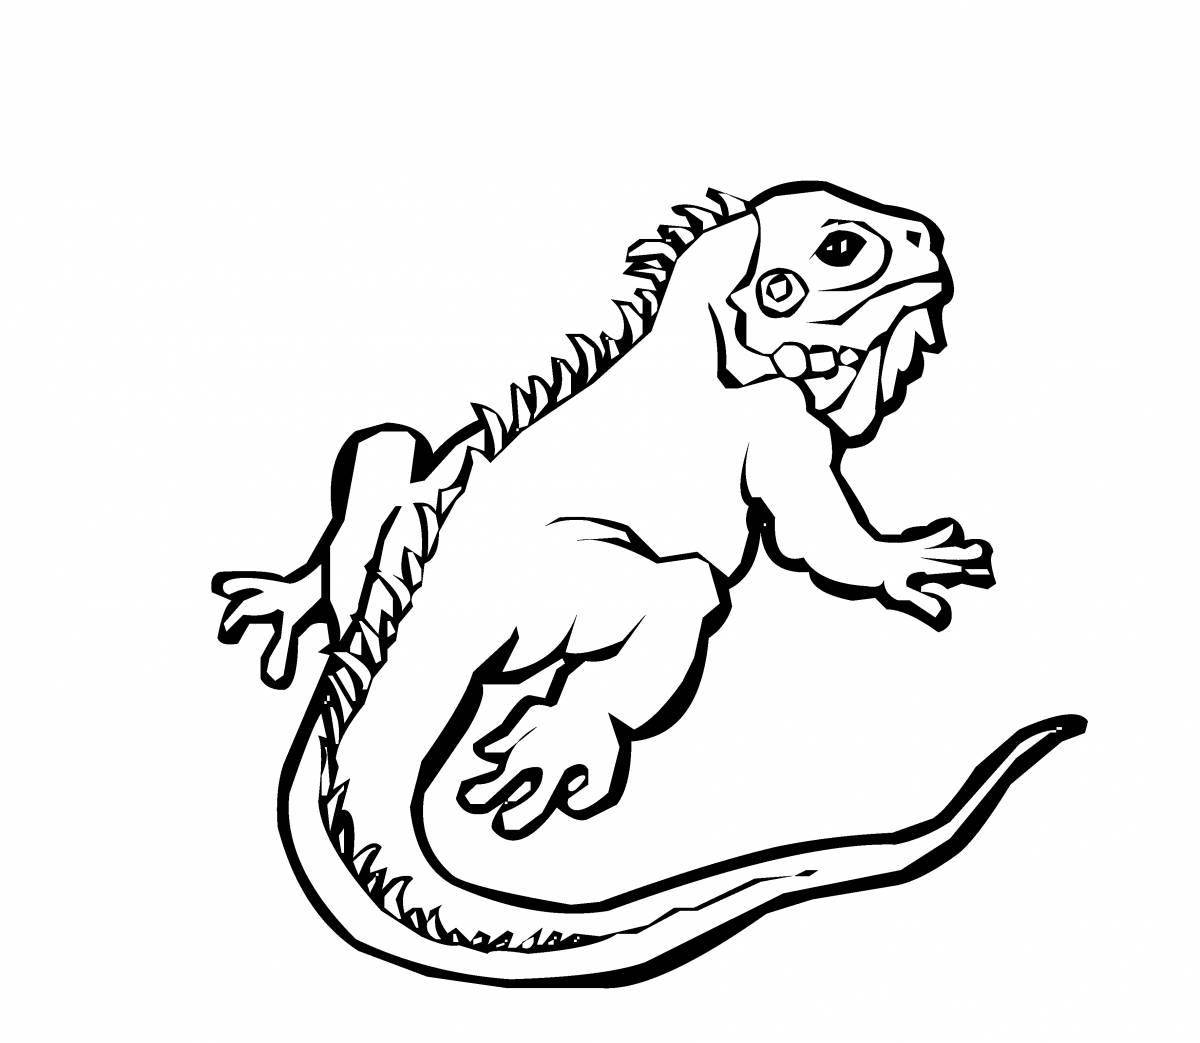 Dazzling iguana coloring page